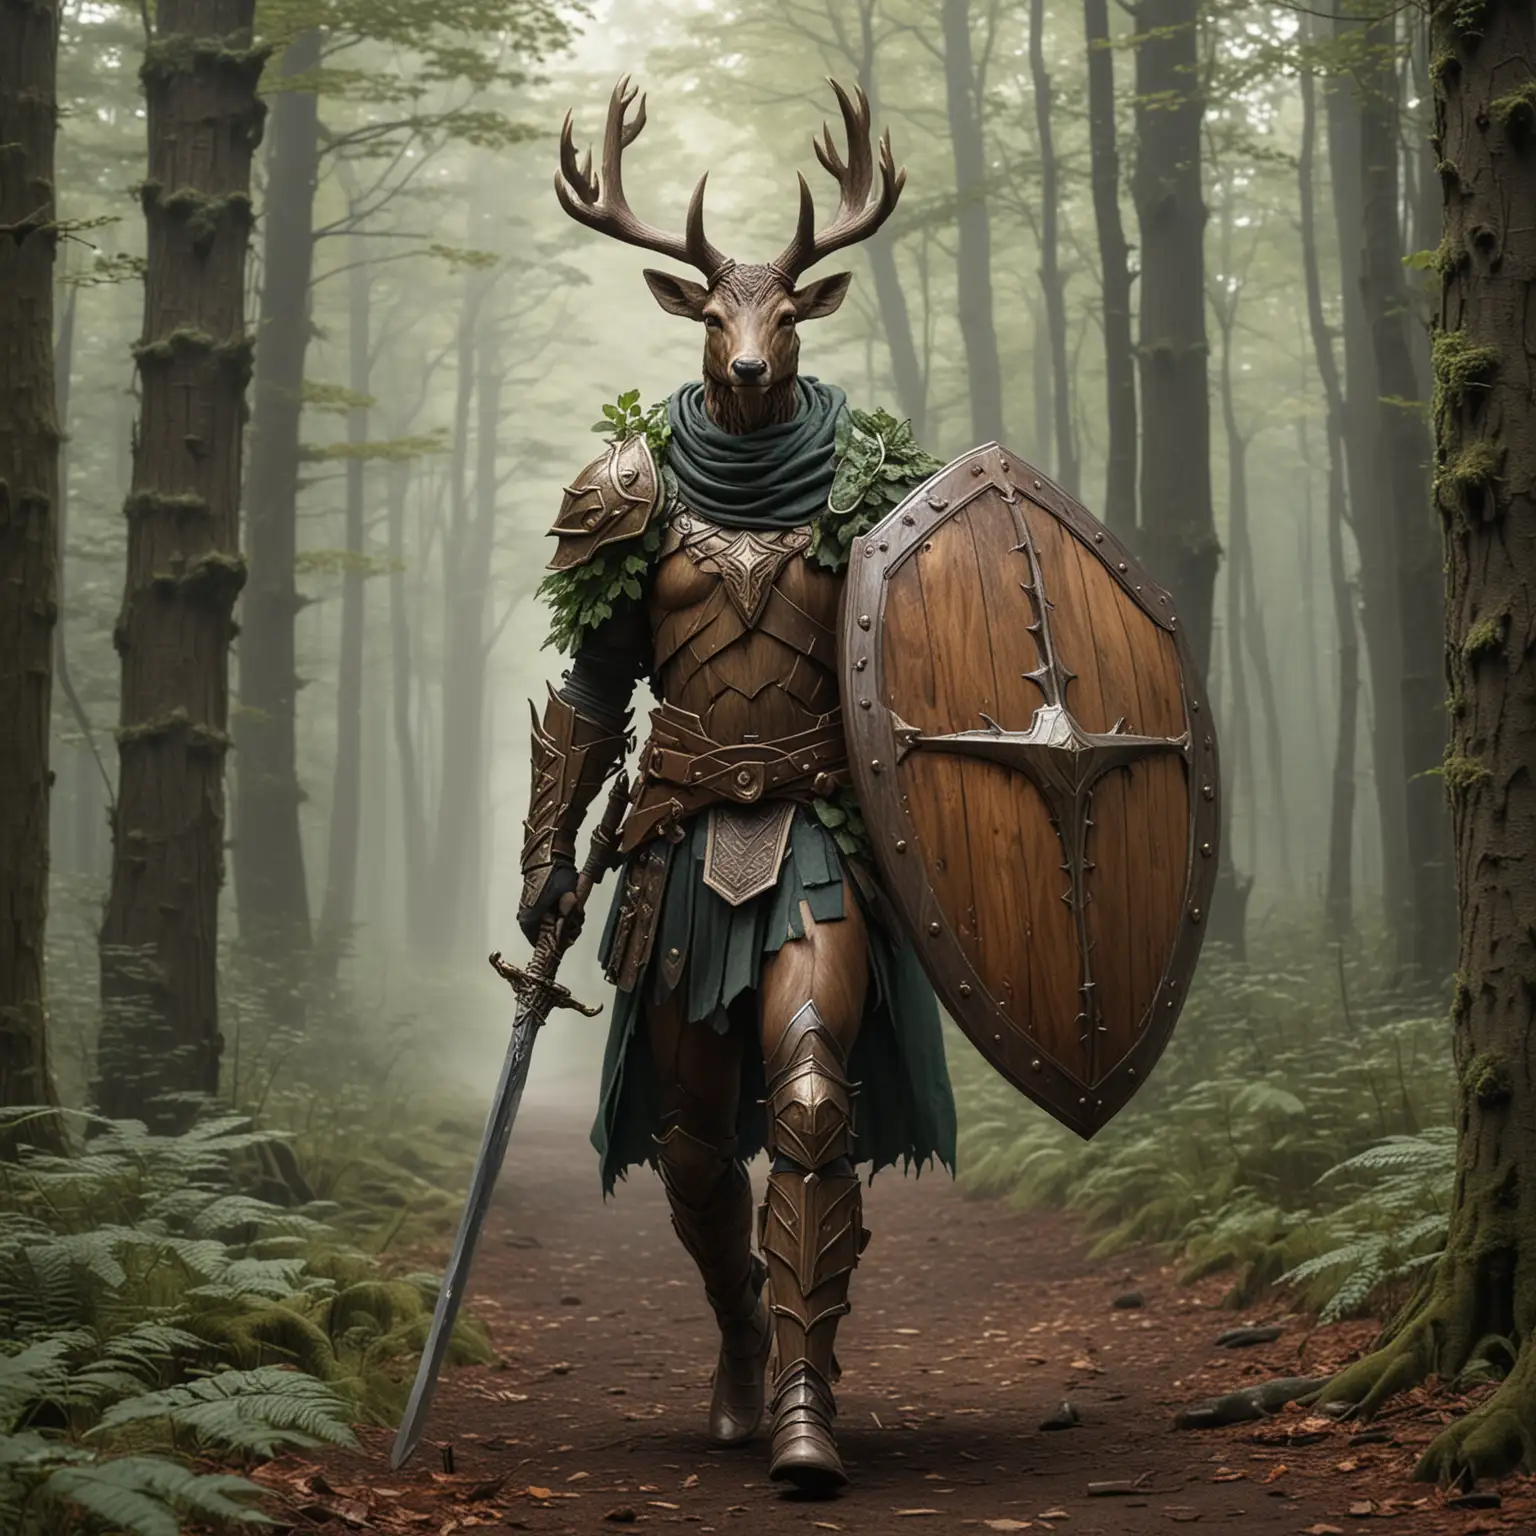 humanoid deer paladin in wooden and helmet with leafy cloak holding a large wooden shield and sword walking through a forest